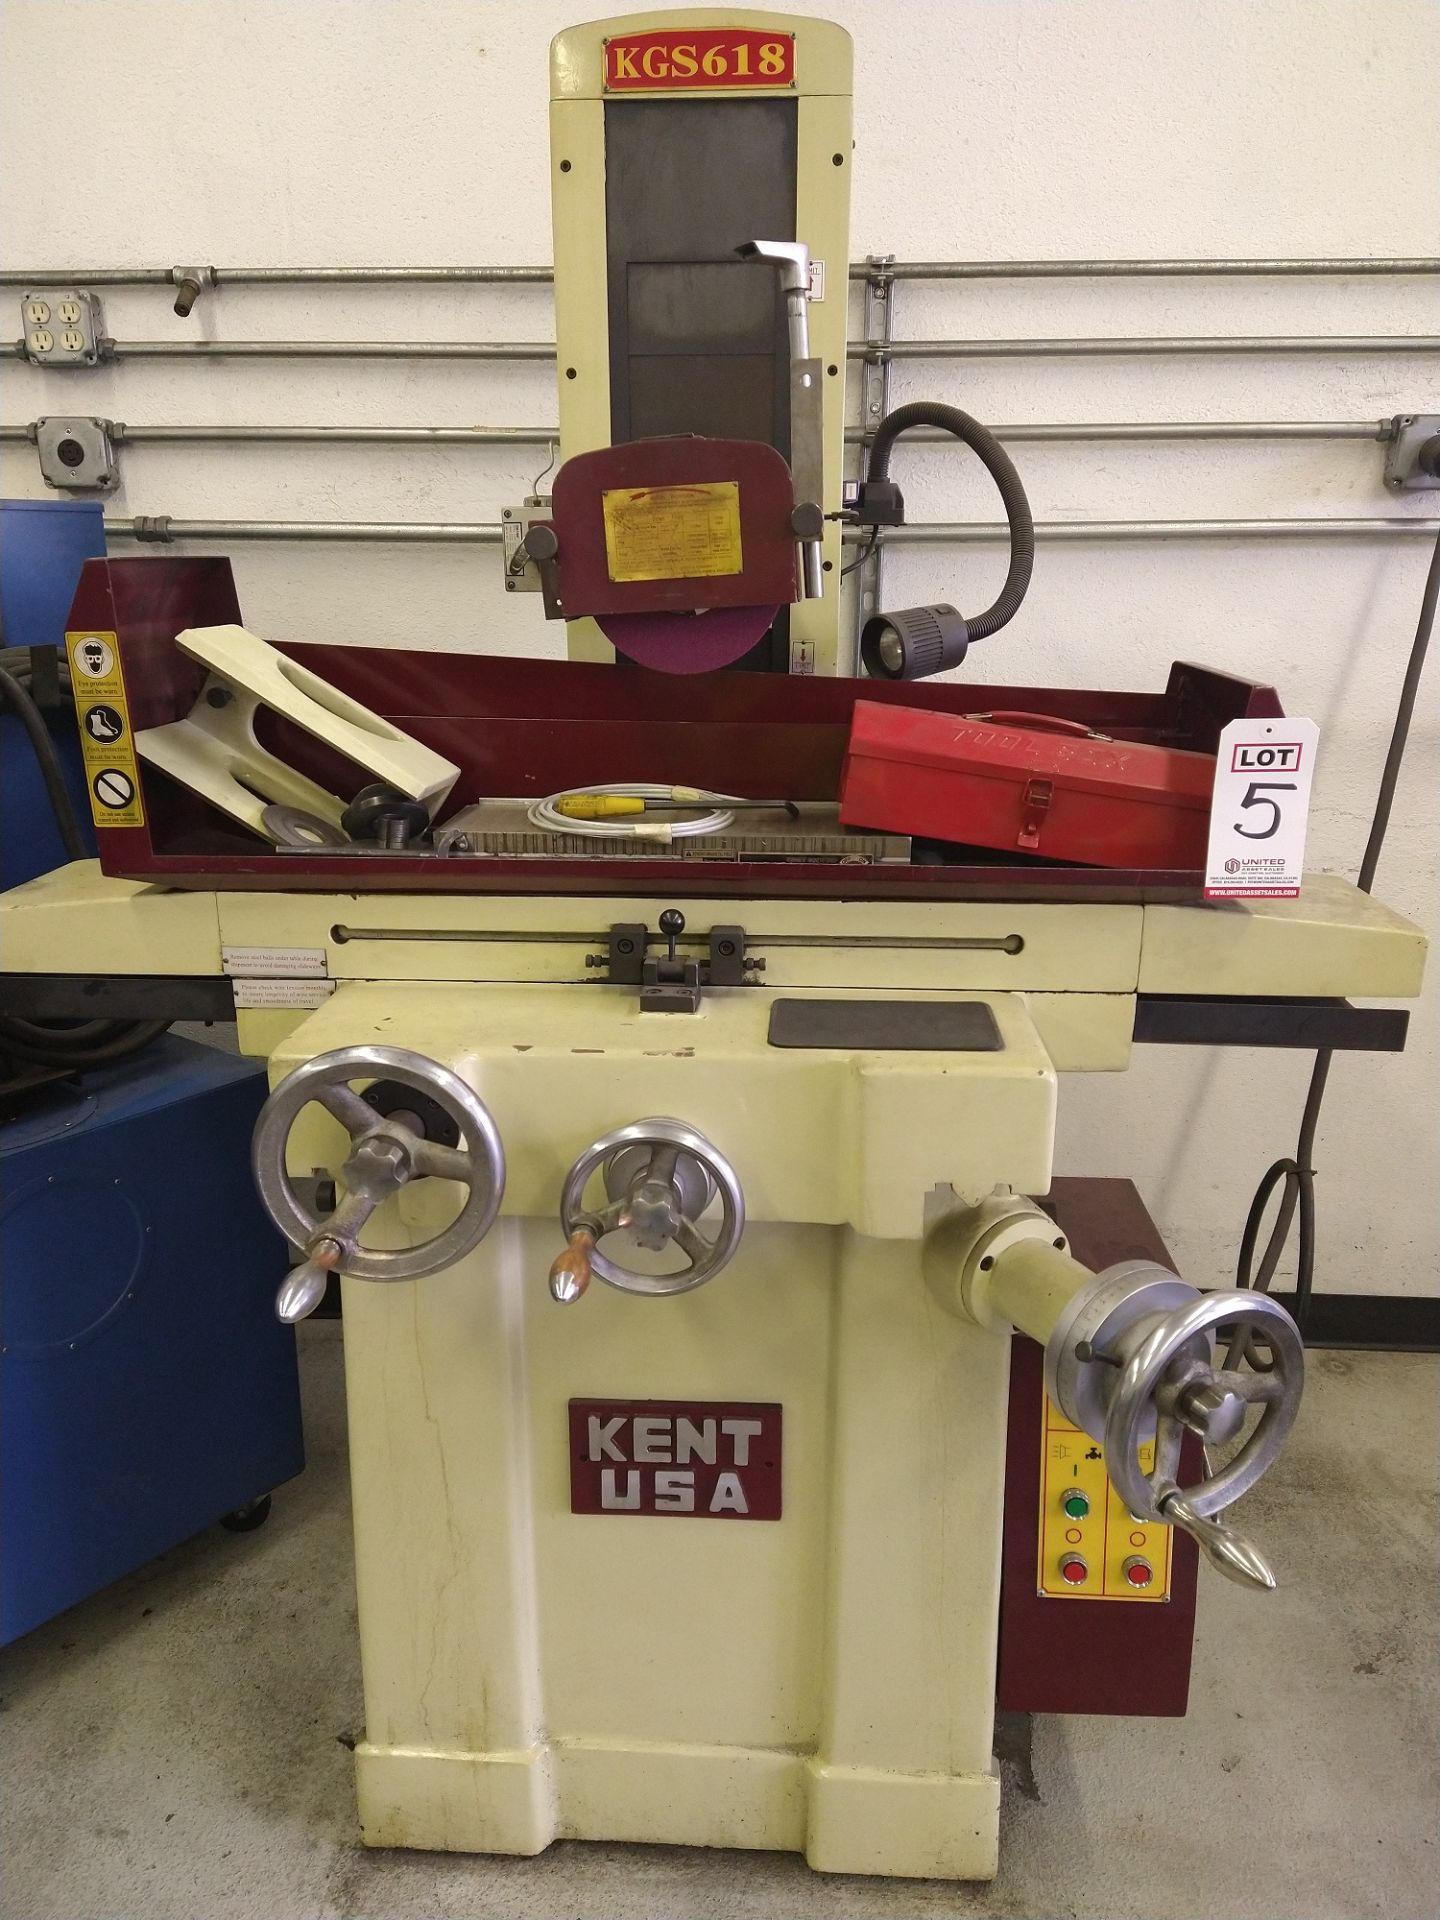 2007 KENT KGS618 SURFACE GRINDER, 6" X 18" MAGNETIC CHUCK - Image 2 of 6